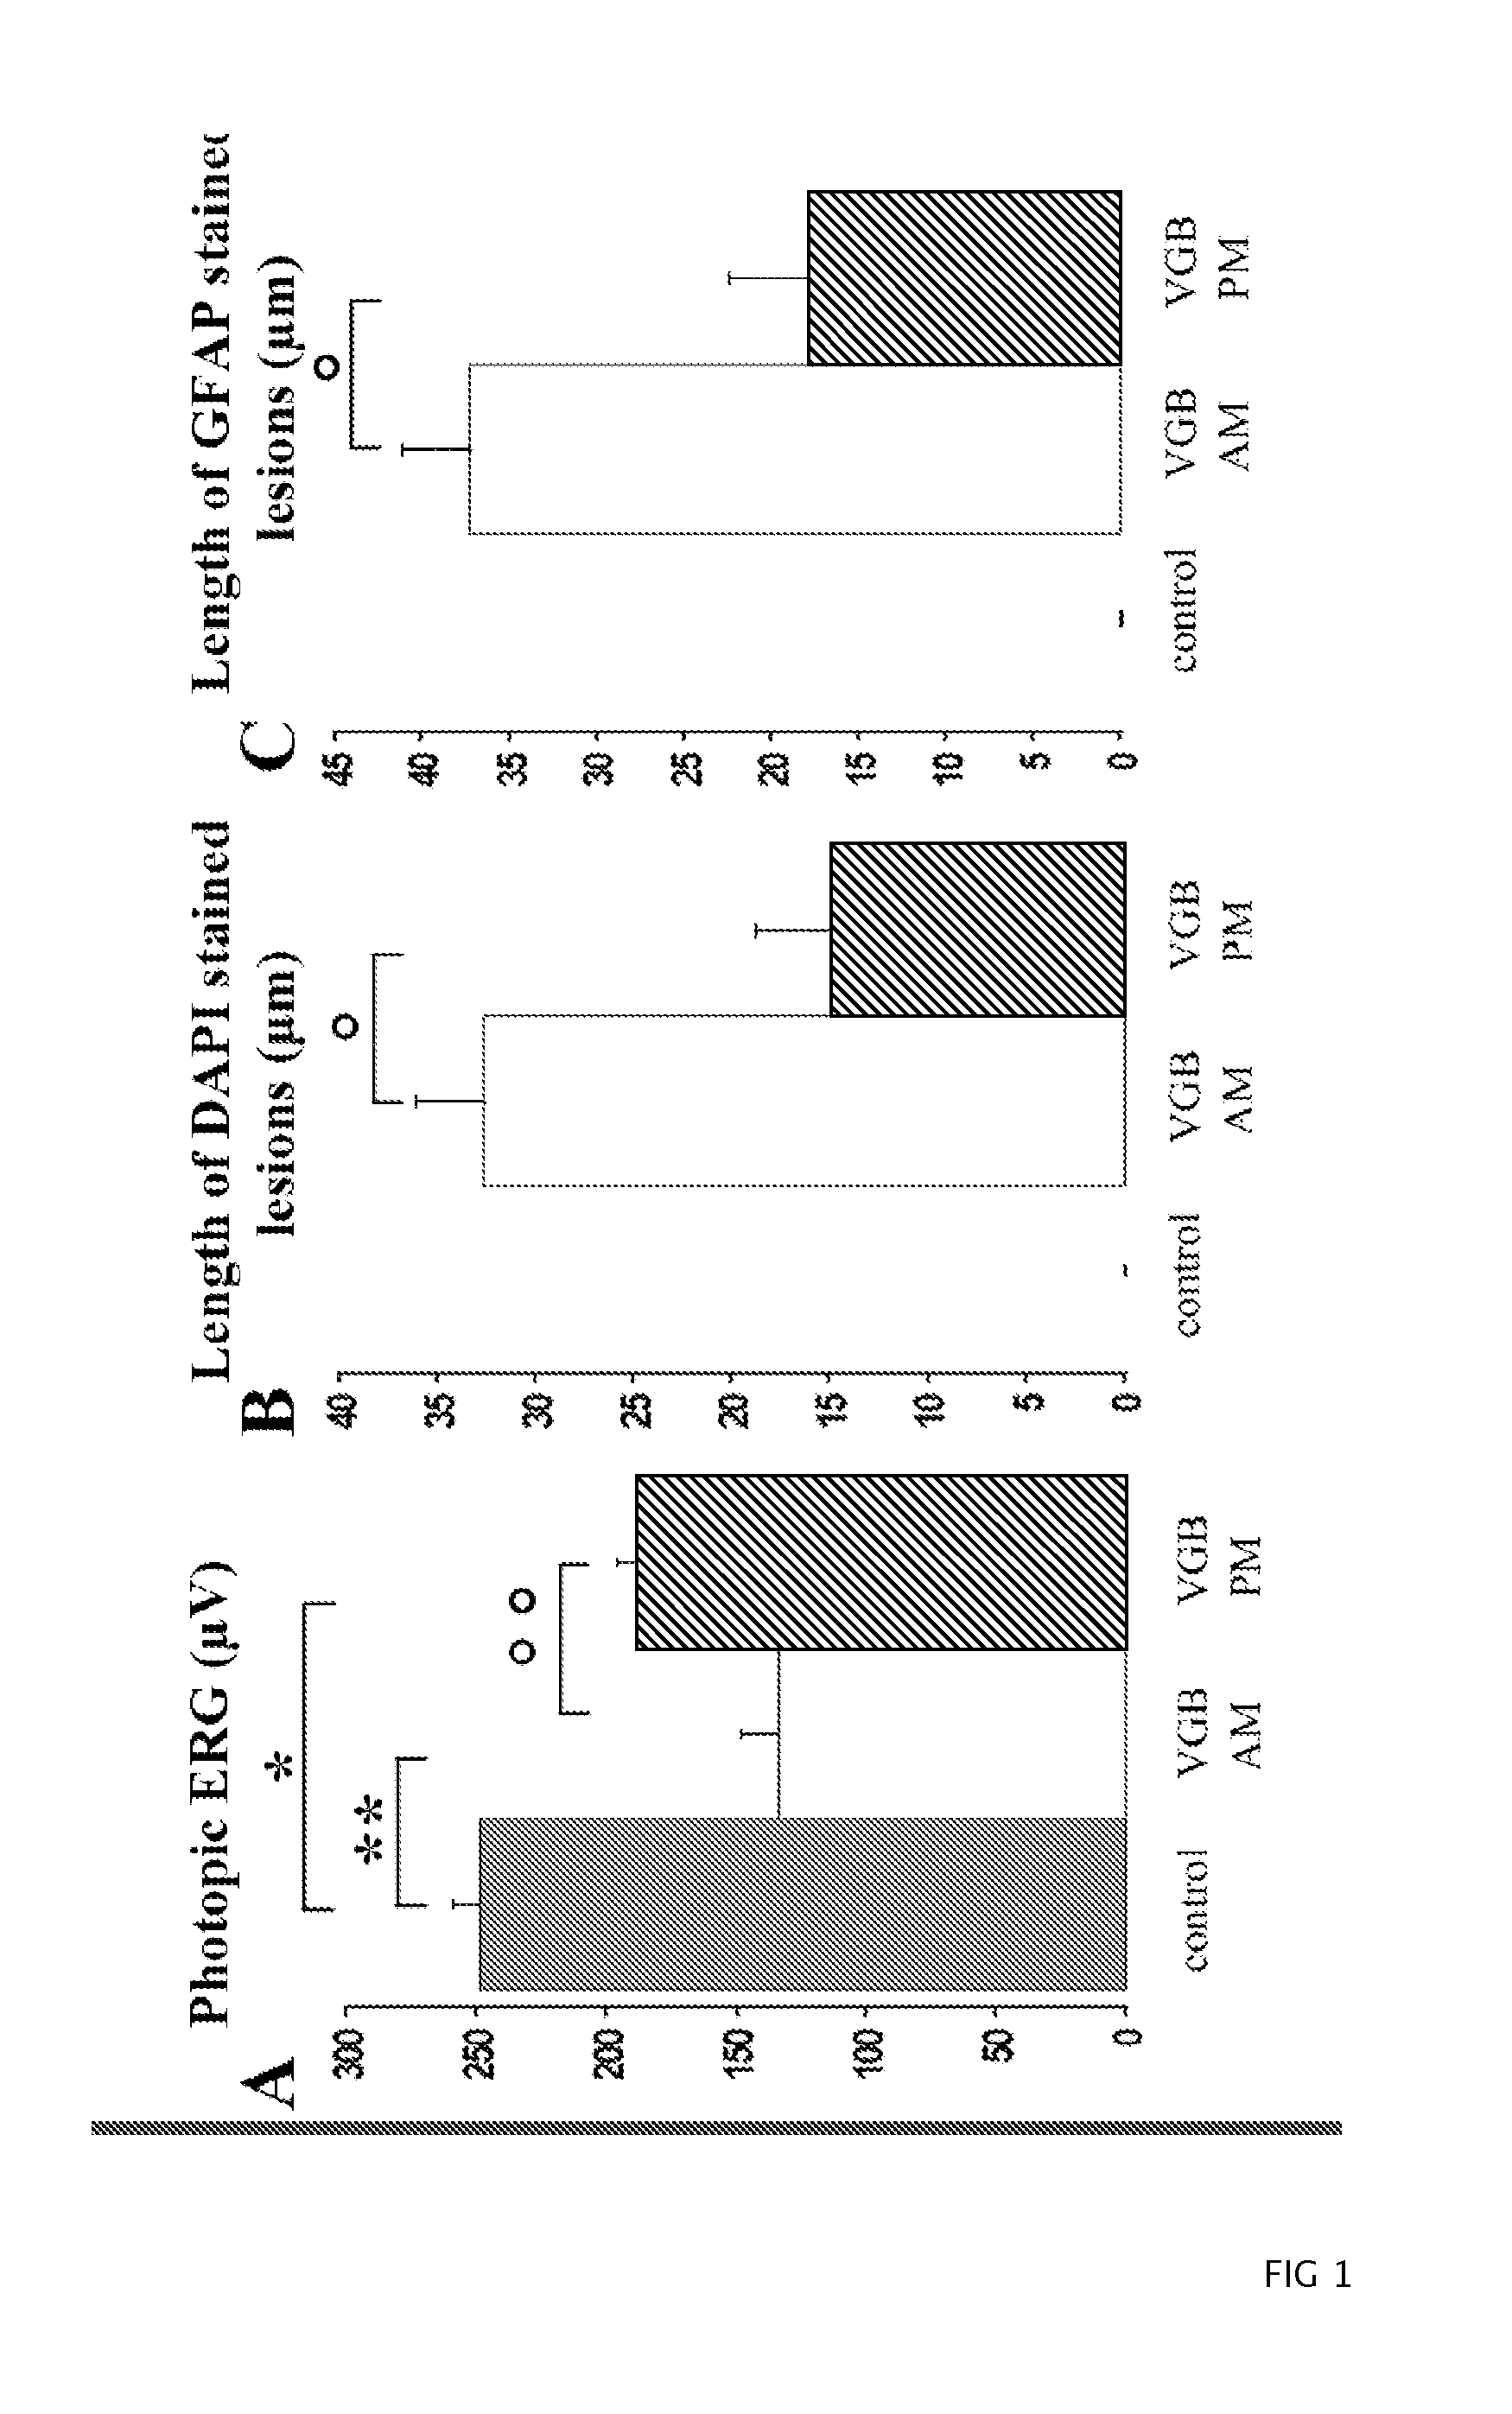 Method Of Treating Or Preventing A Convulsive Disorder In A Patient In Need Thereof